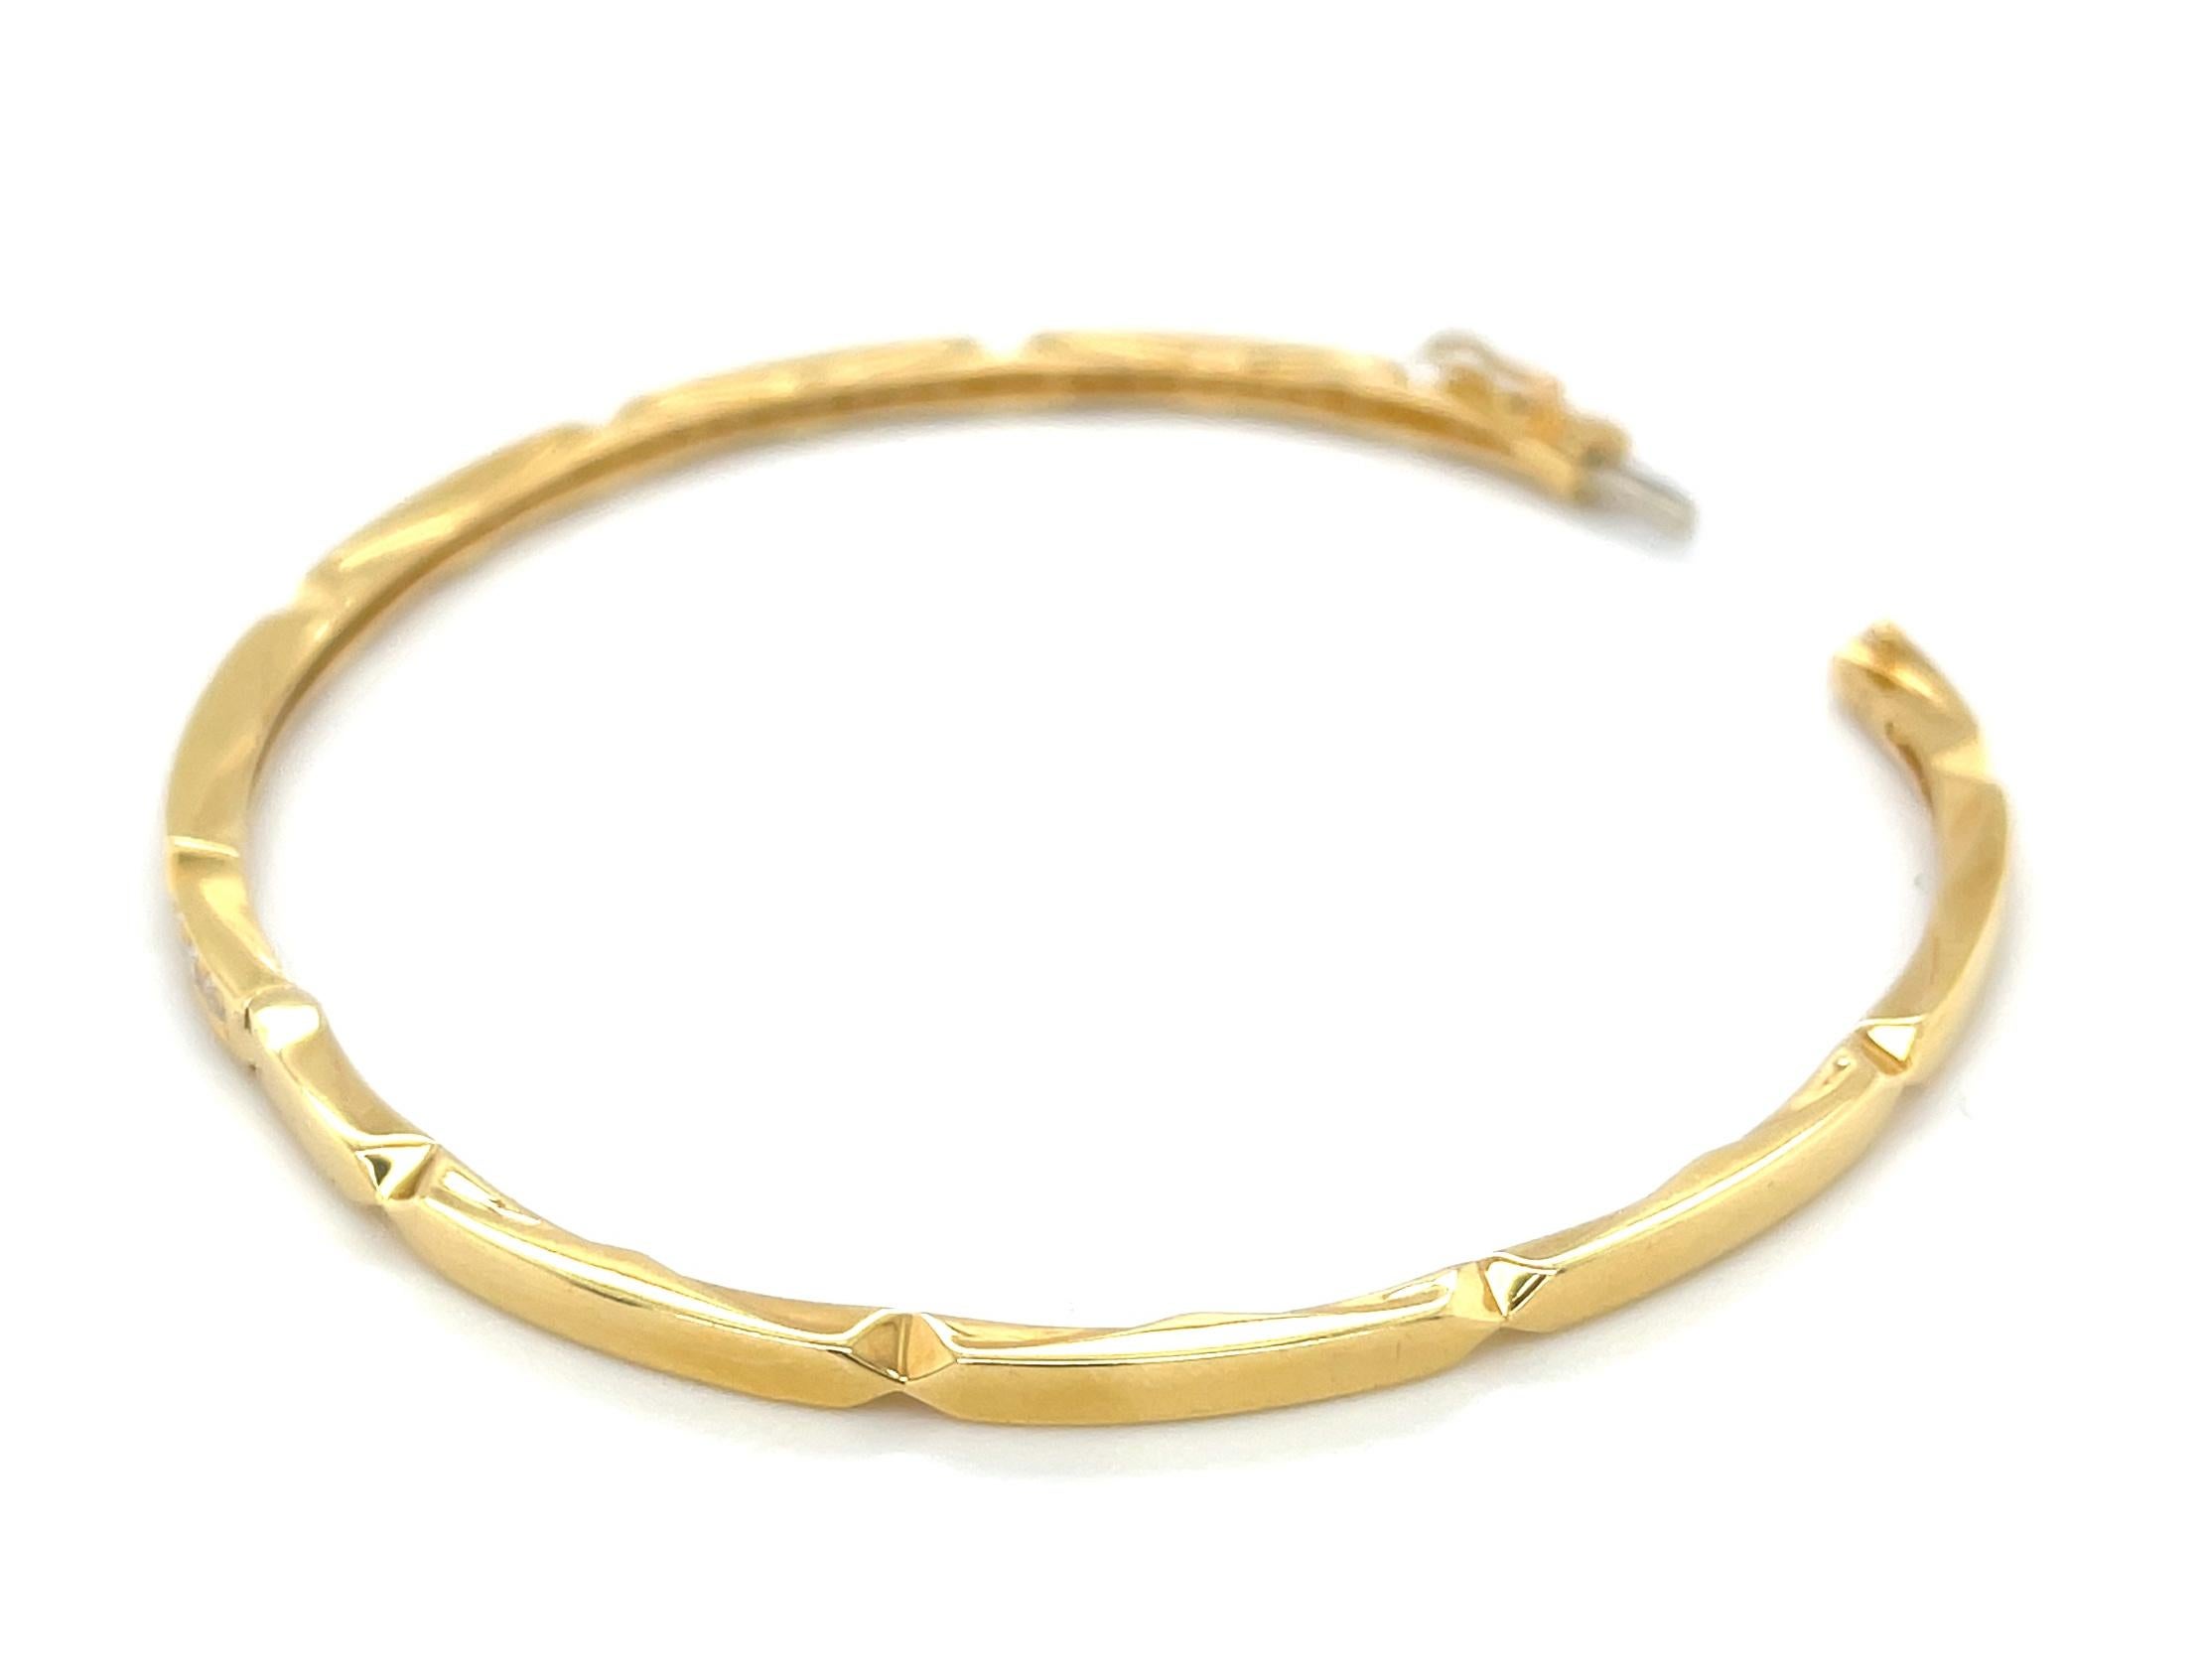 Diamond Pave Bangle Bracelet in 18k Yellow Gold  In New Condition For Sale In Los Angeles, CA